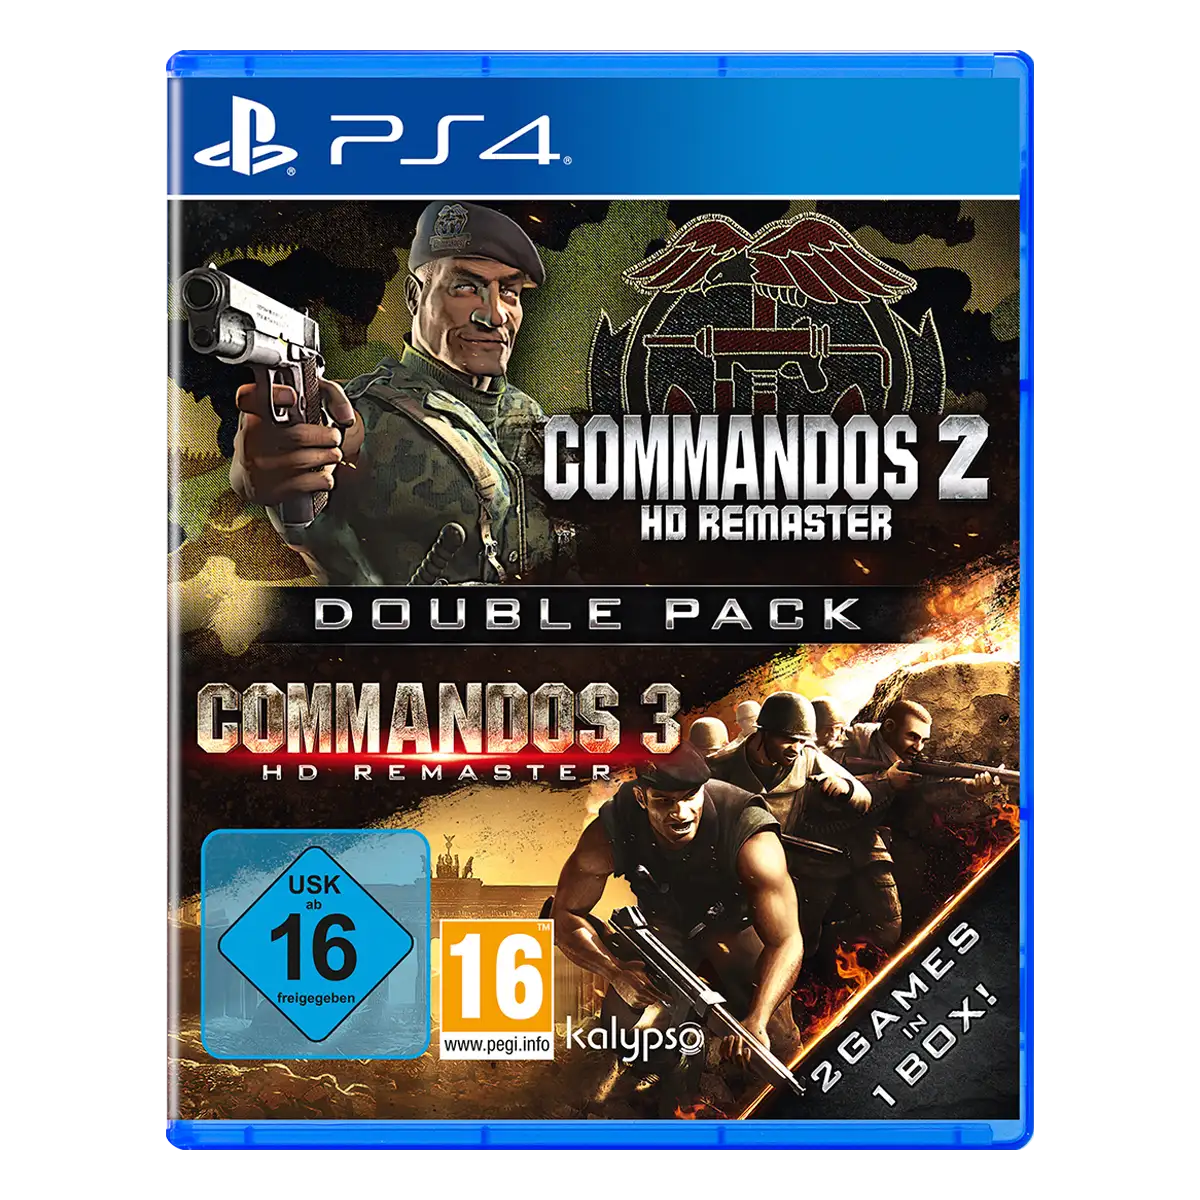 Commandos 2 & 3 - HD Remaster Double Pack (PS4)